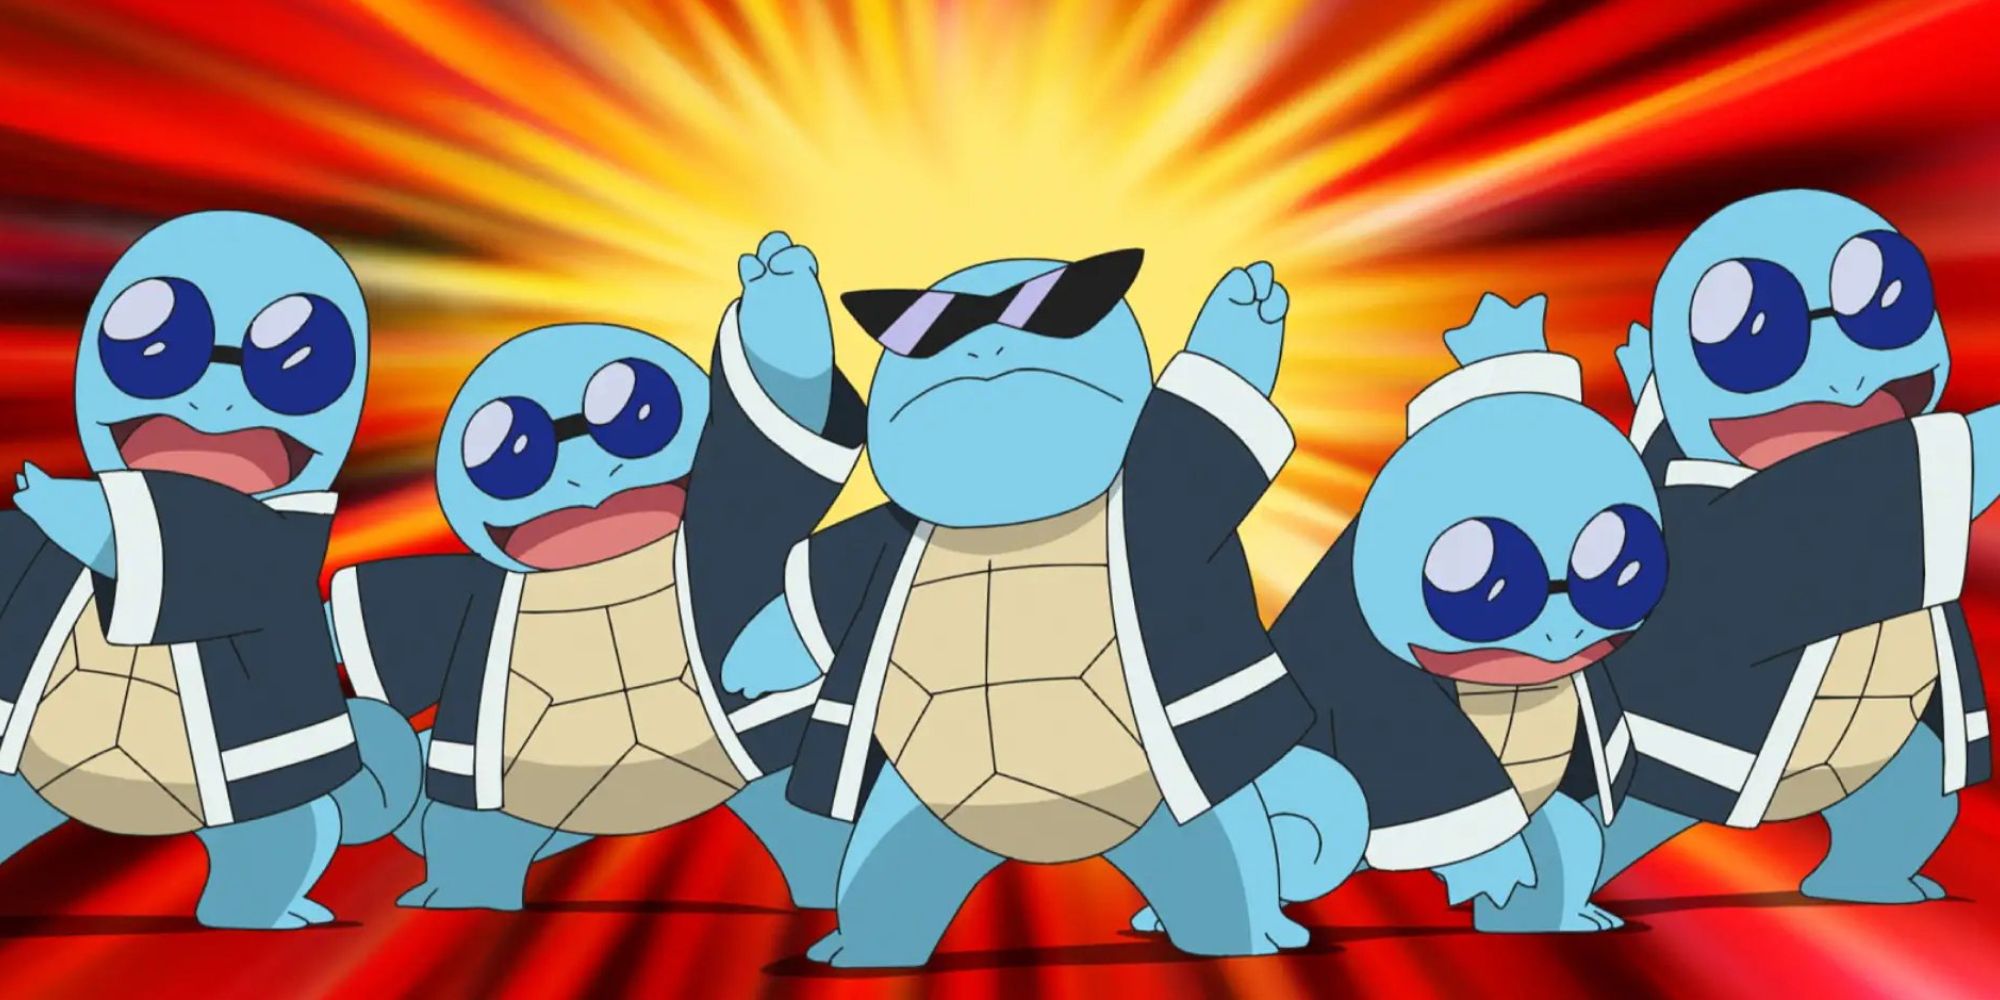 Five Squirtles wearing jackets and sunglasses